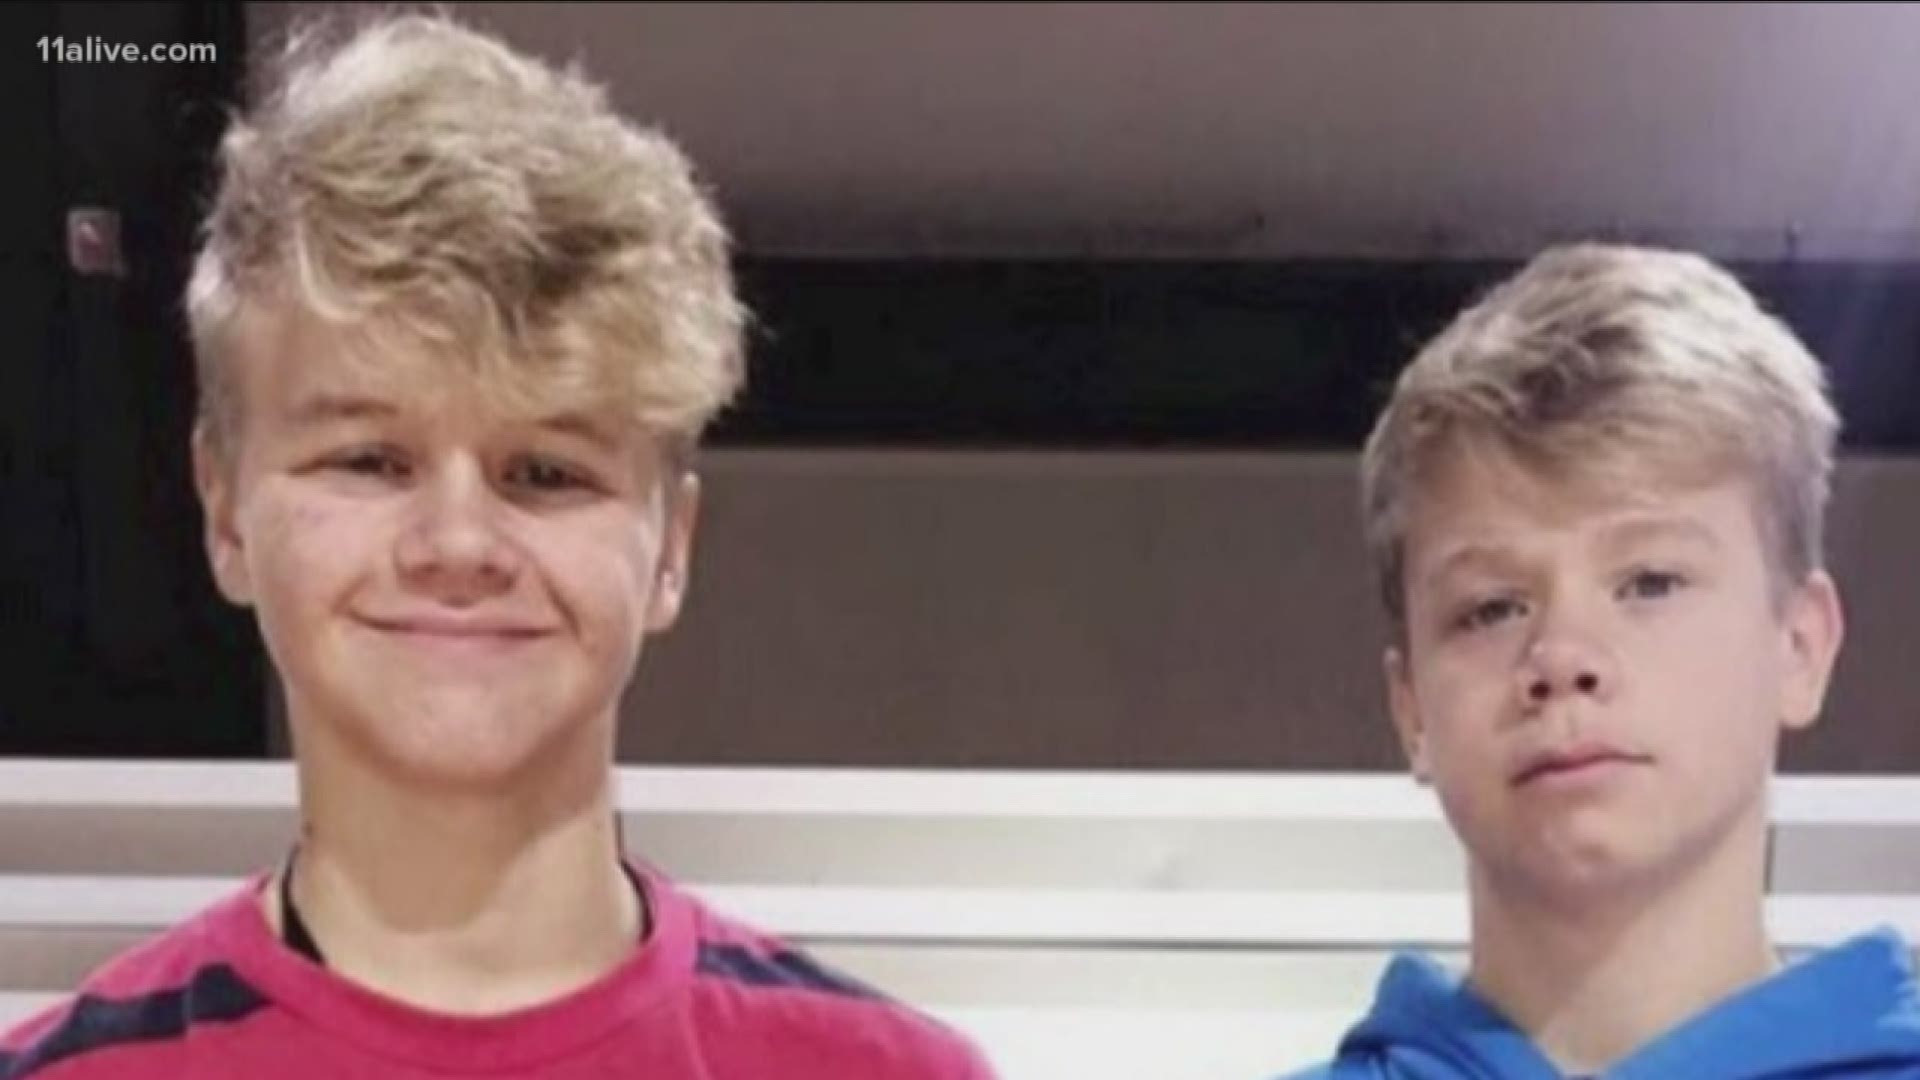 Officials said 17-year-old Riley Sisson and 15-year-old Reece Sisson were last seen in the Due West Road area around 6 p.m. Saturday April 13.